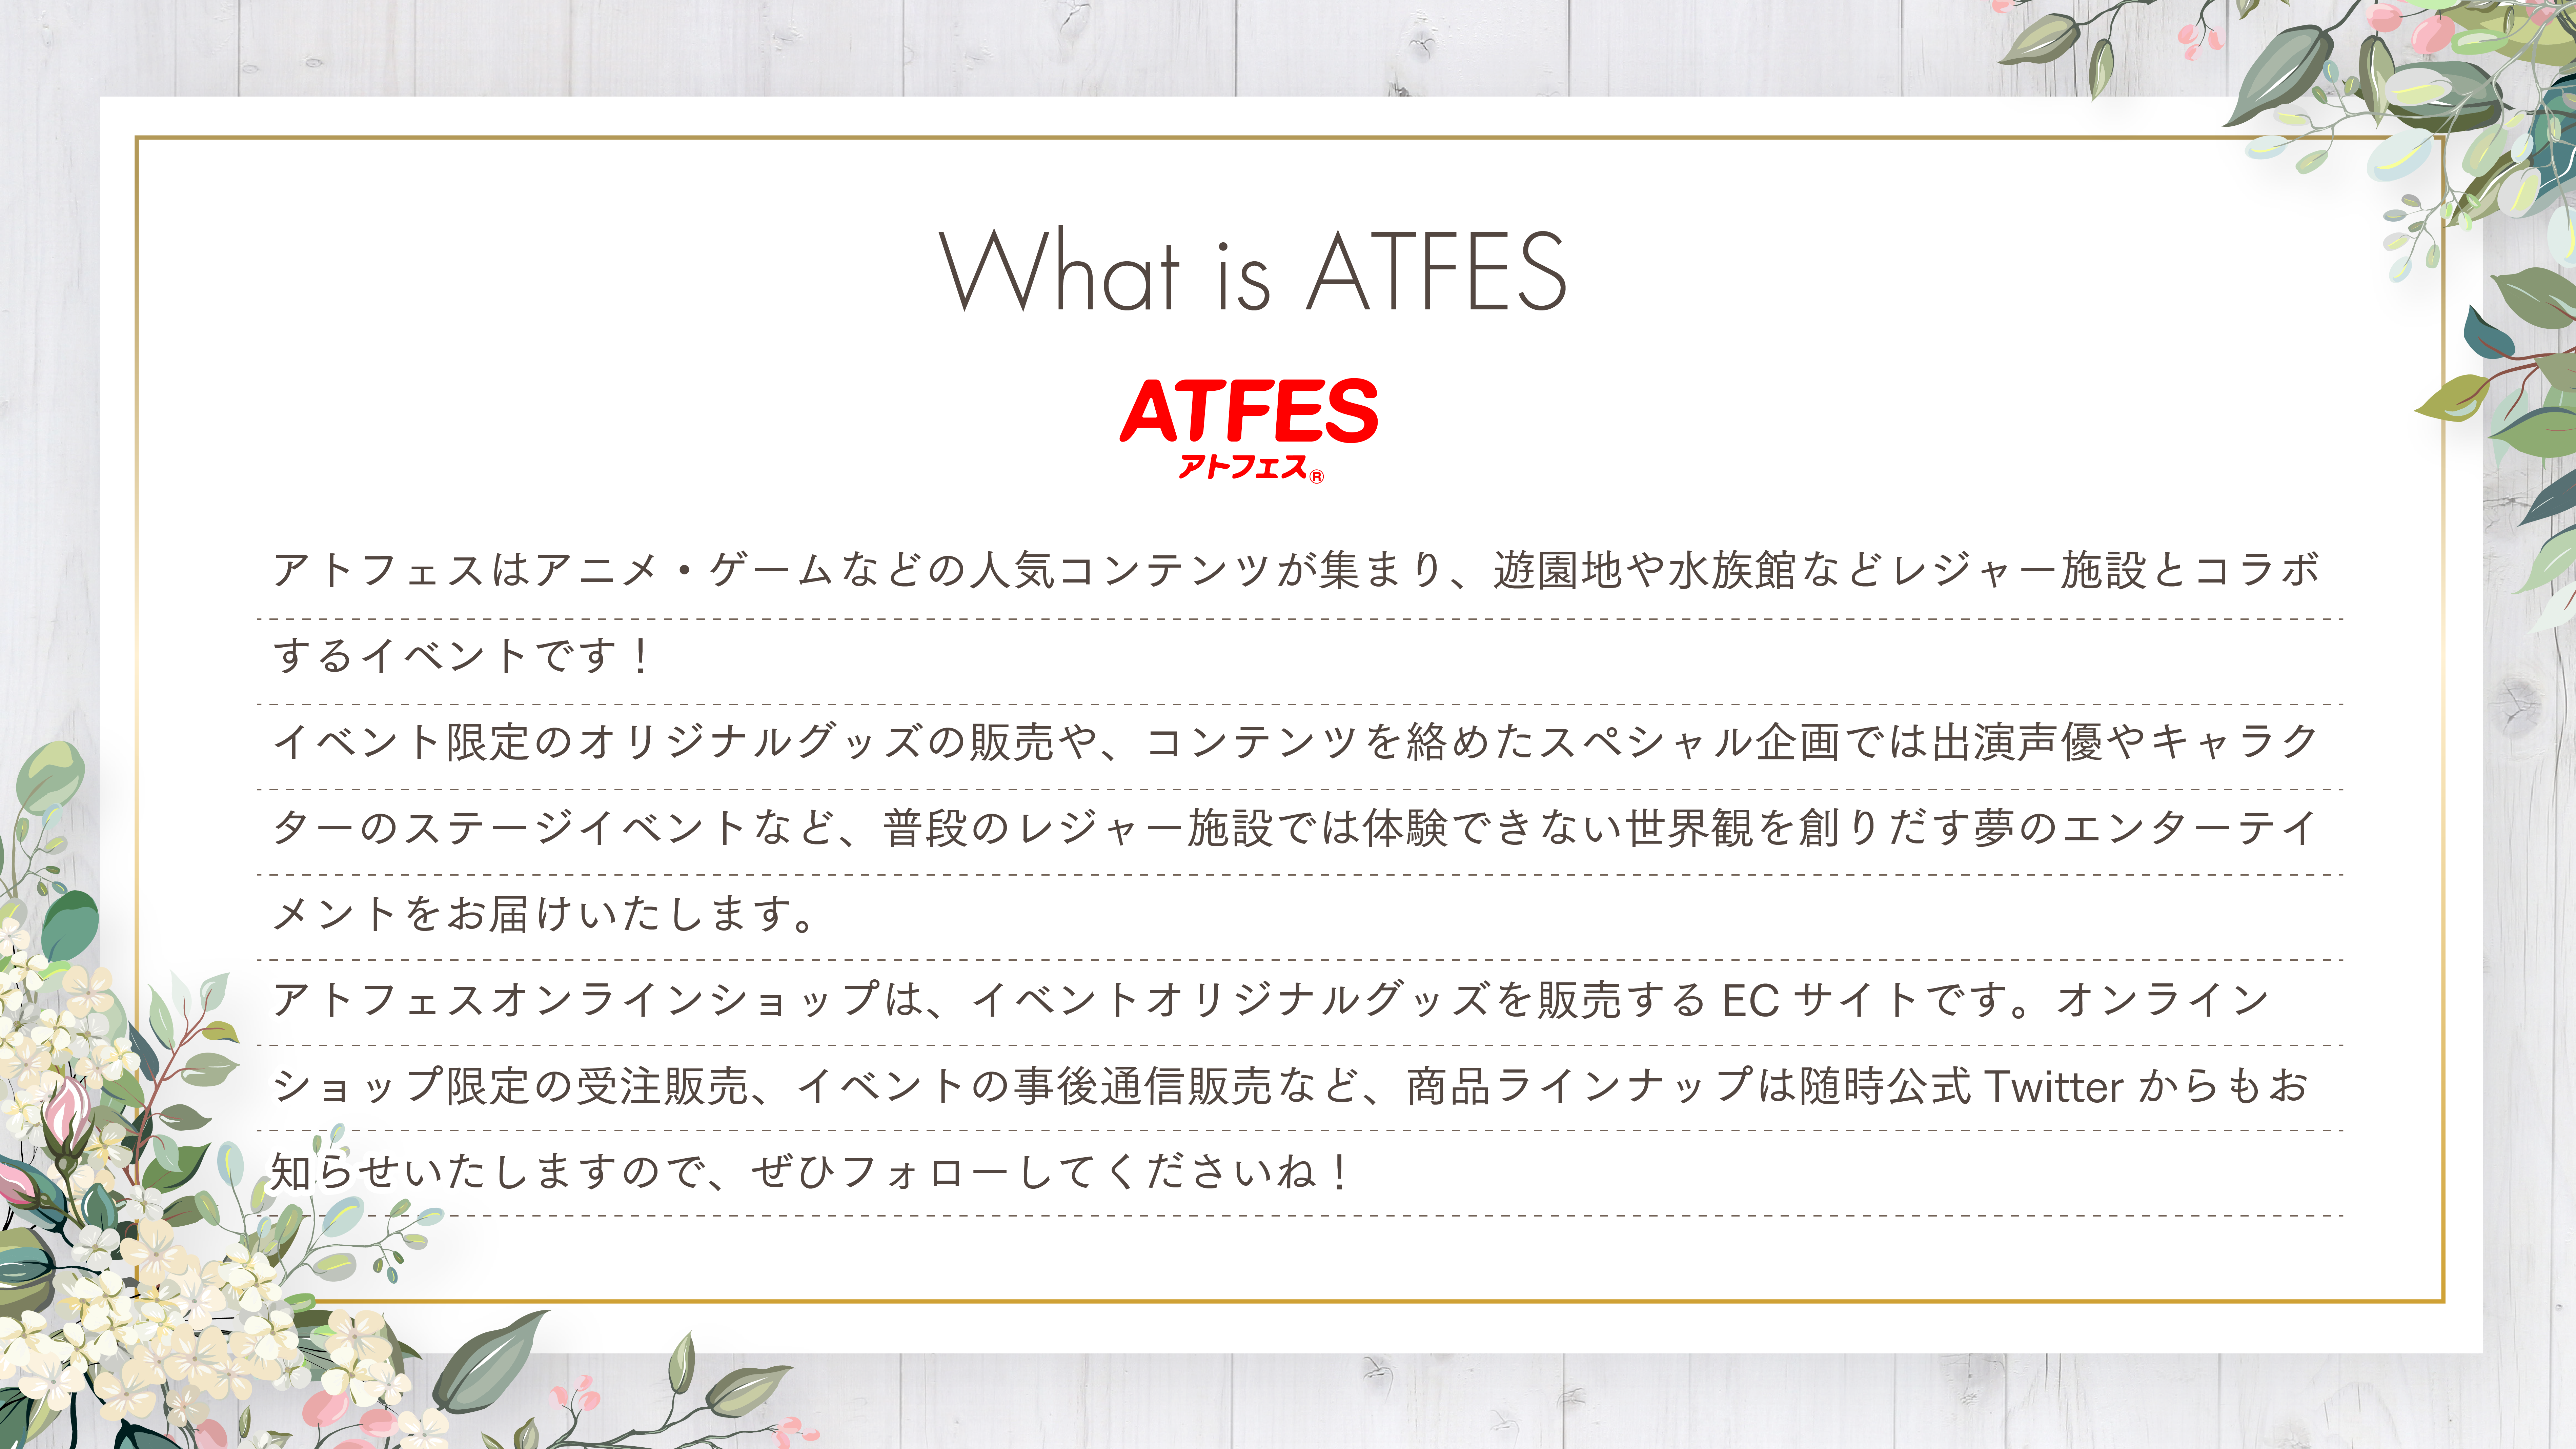 What is ATFES